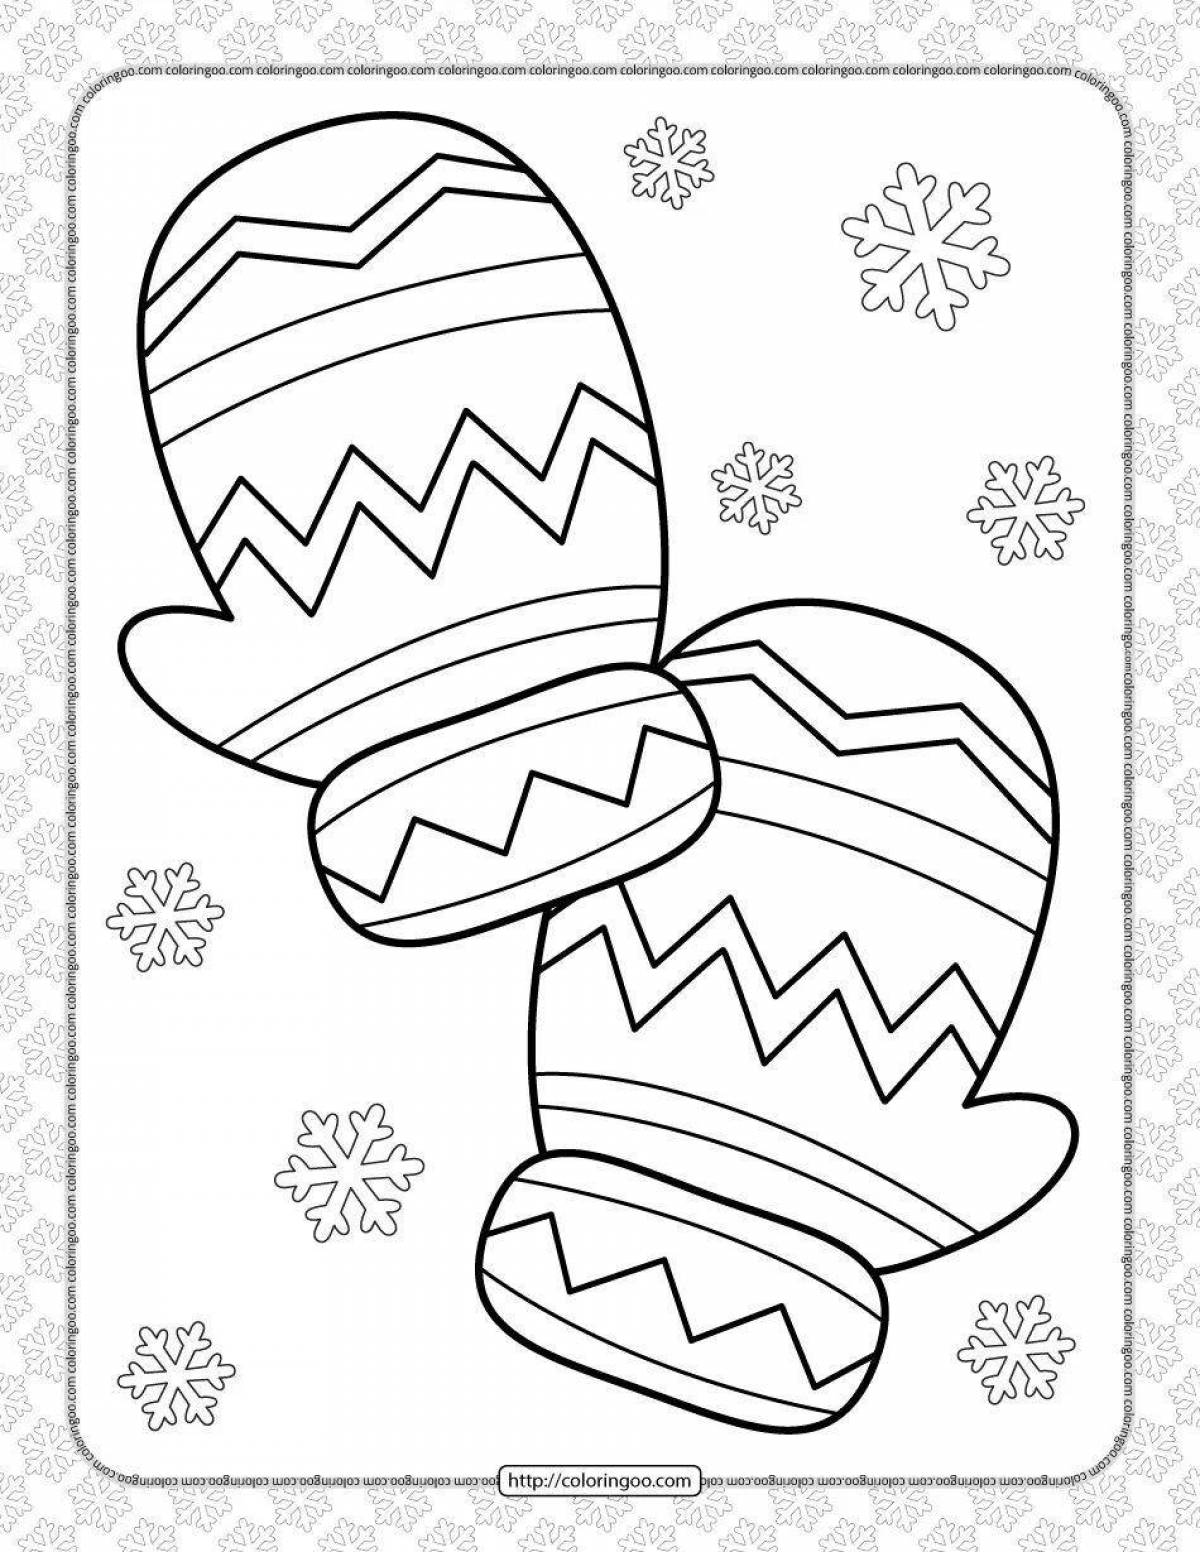 Charming mitten coloring book for kids